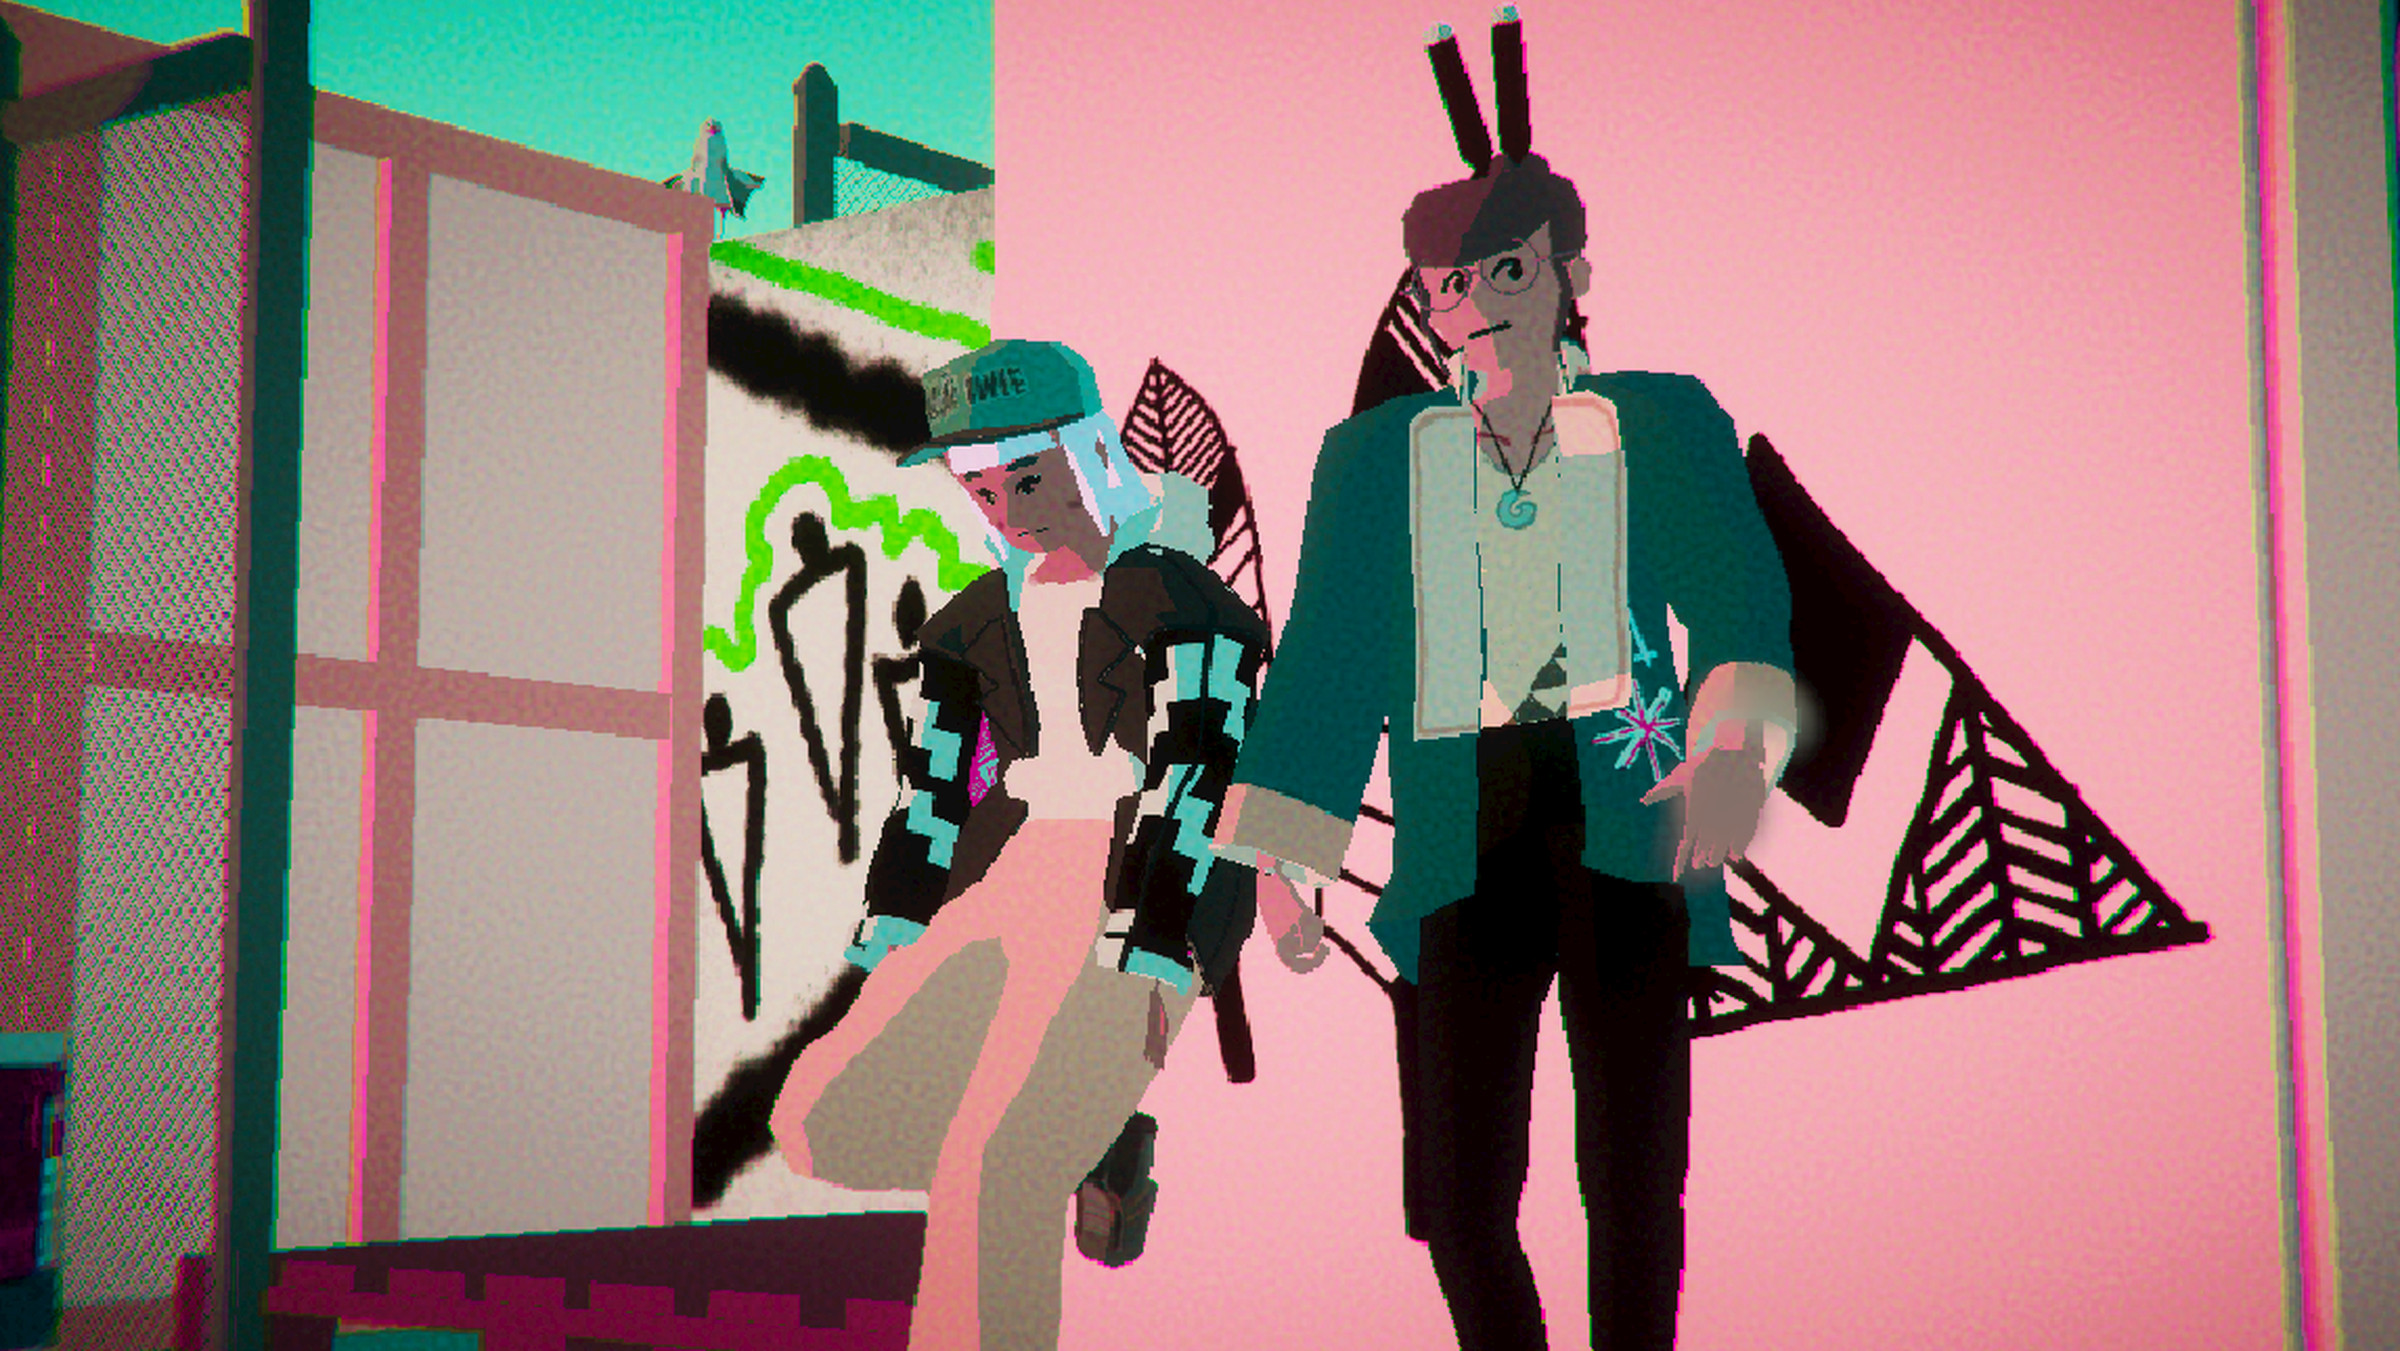 Two angular cartoon figures in Asian dress walk past a screen against a pink back wall.